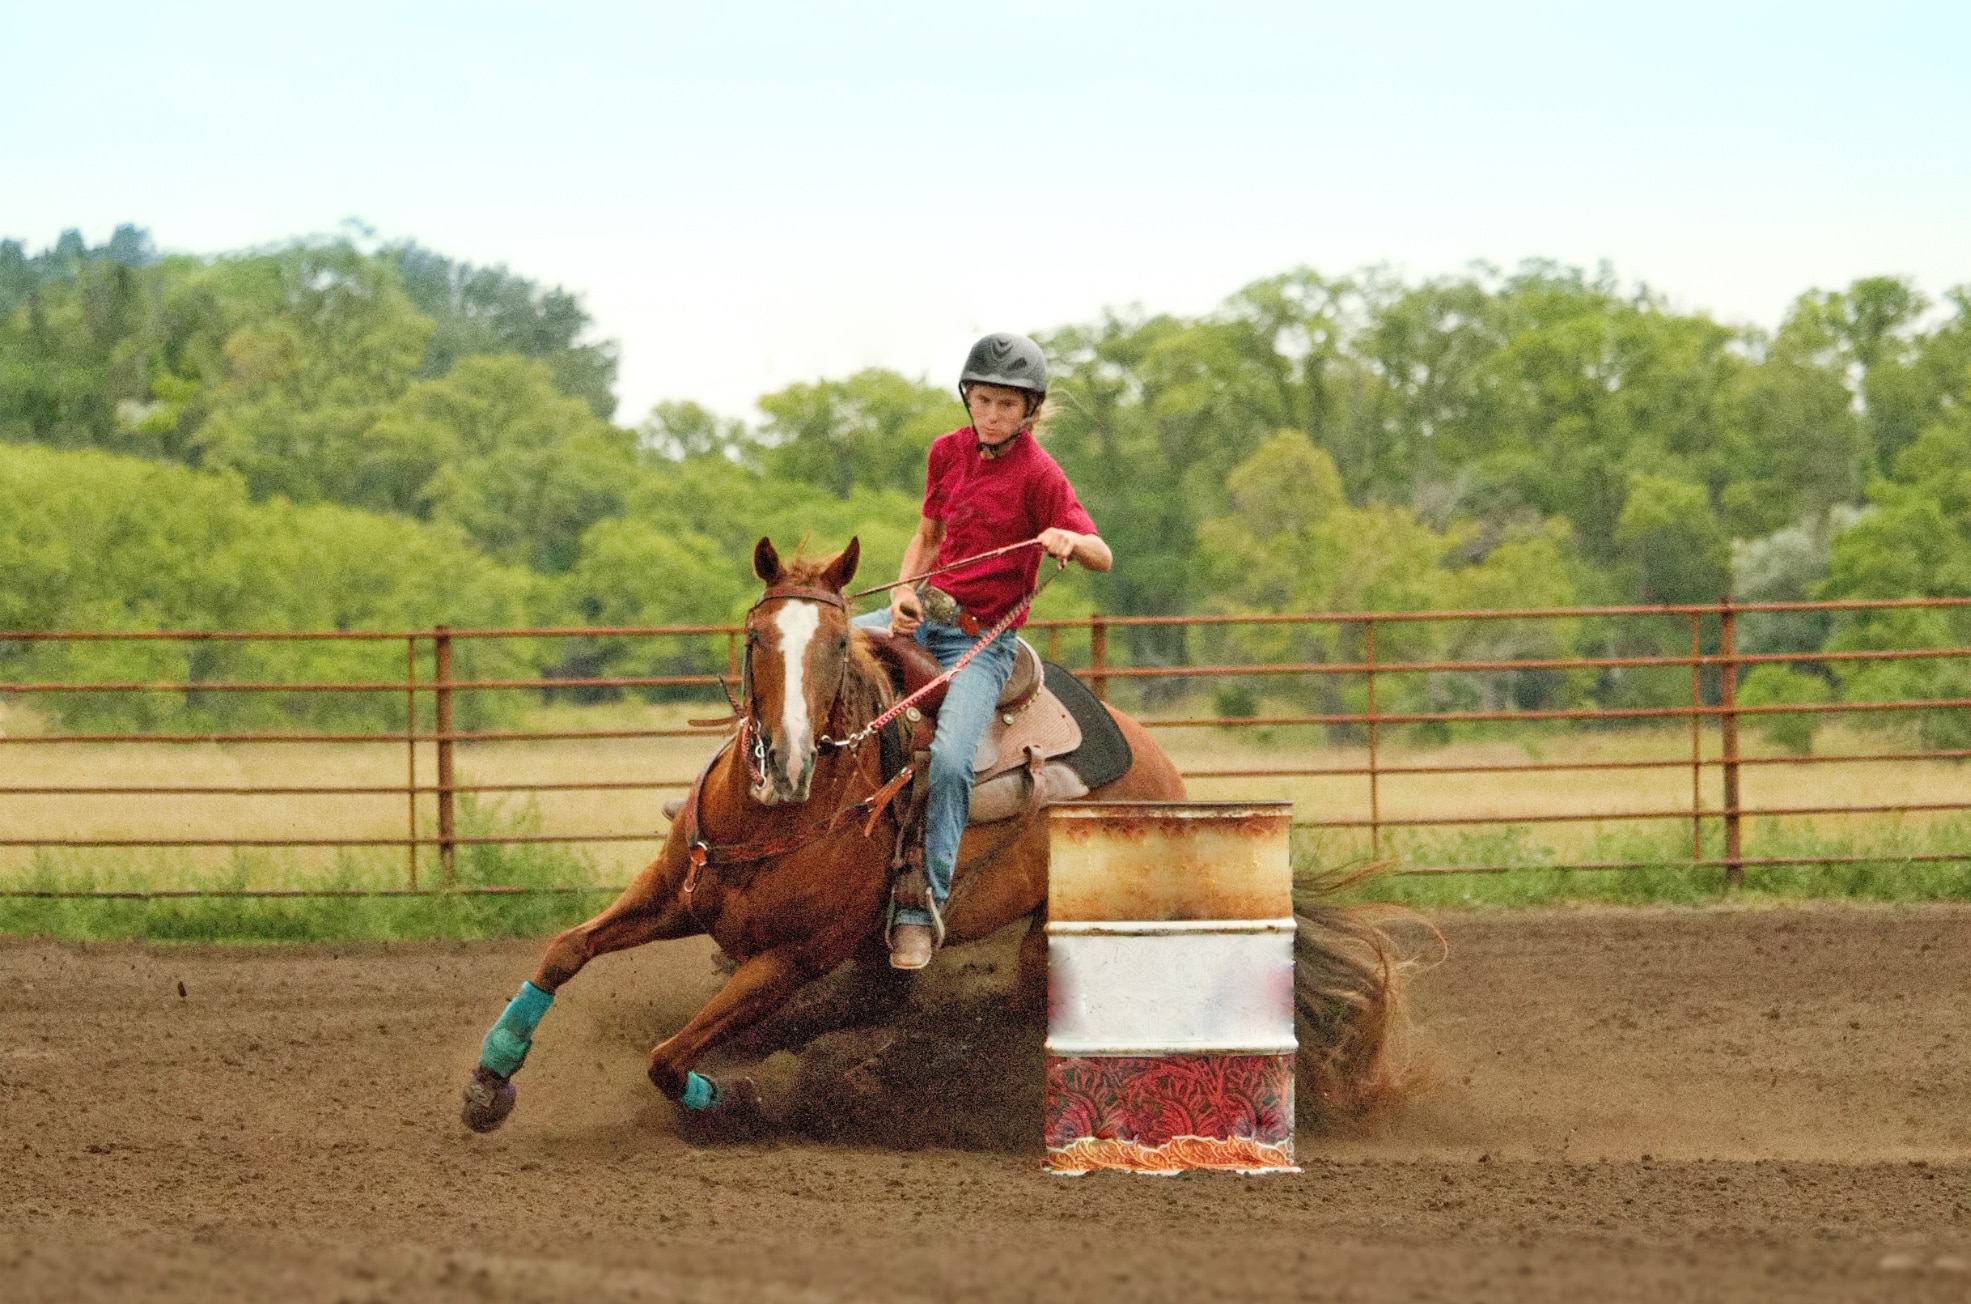 Equine exercise-induced pulmonary haemorrhage (EIPH), commonly known as ‘bleeders’, was a disease generally thought to be associated with racehorses, but it is also often seen in rodeo horses, especially barrel racers.